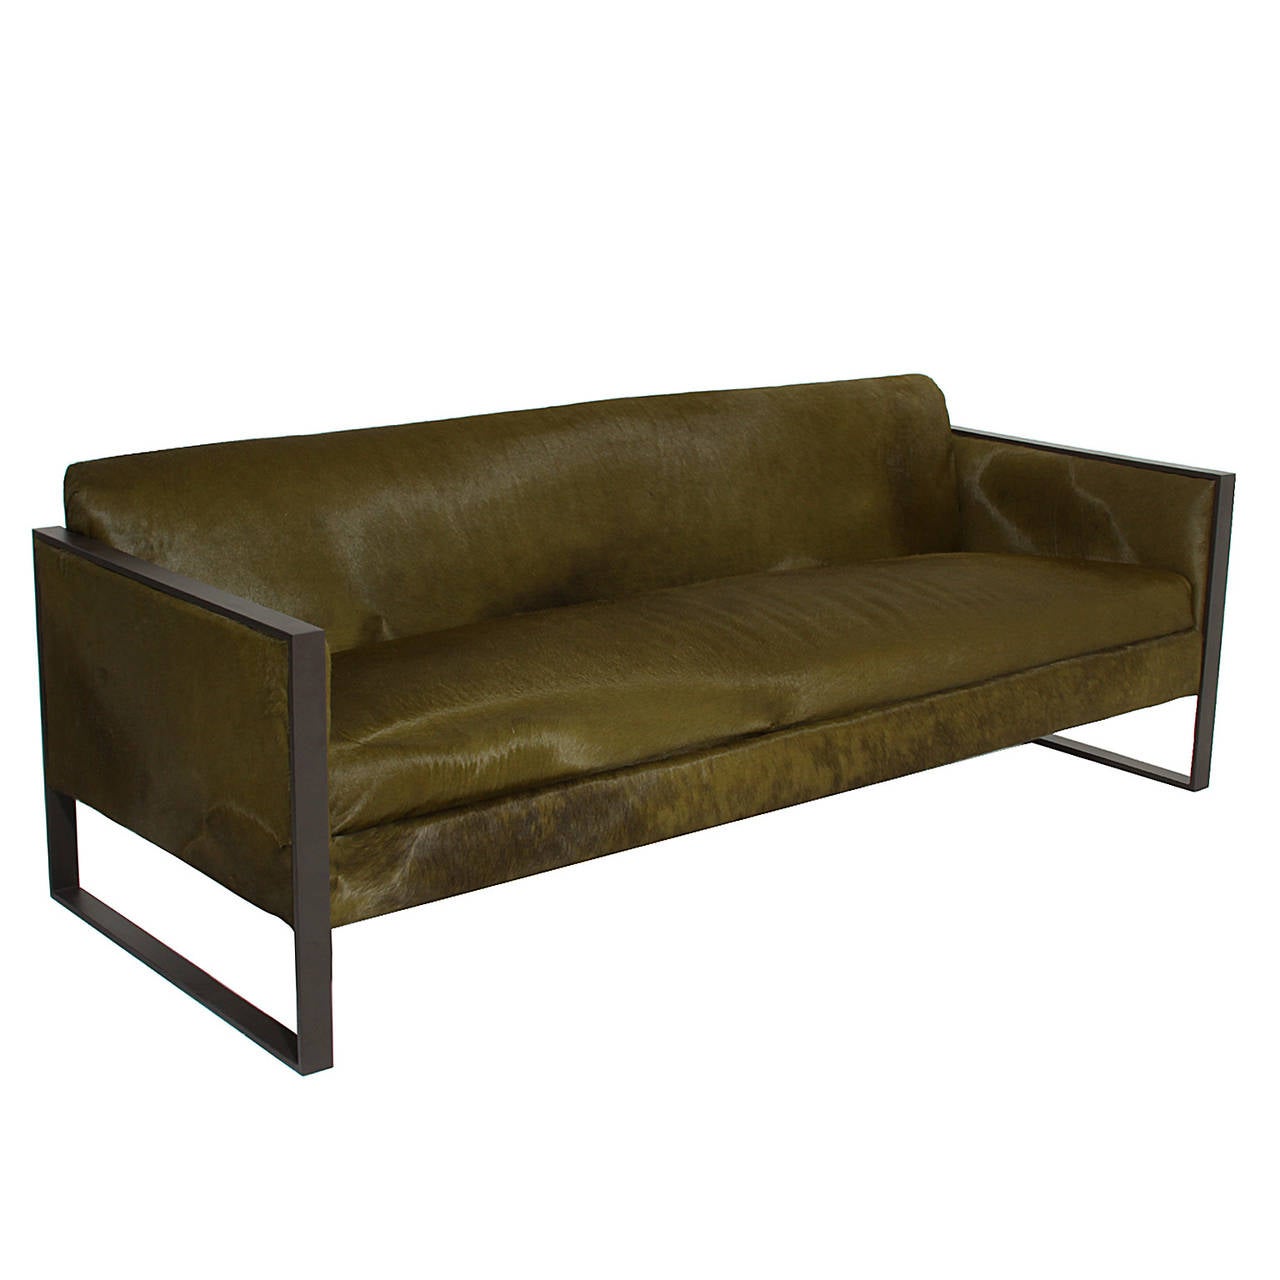 A stunning Milo Baughman sofa with a steel flat bar construction and upholstered in a saturated olive green pony hair upholstery.

Many pieces are stored in our warehouse, so please click on CONTACT DEALER under our logo below to find out if the